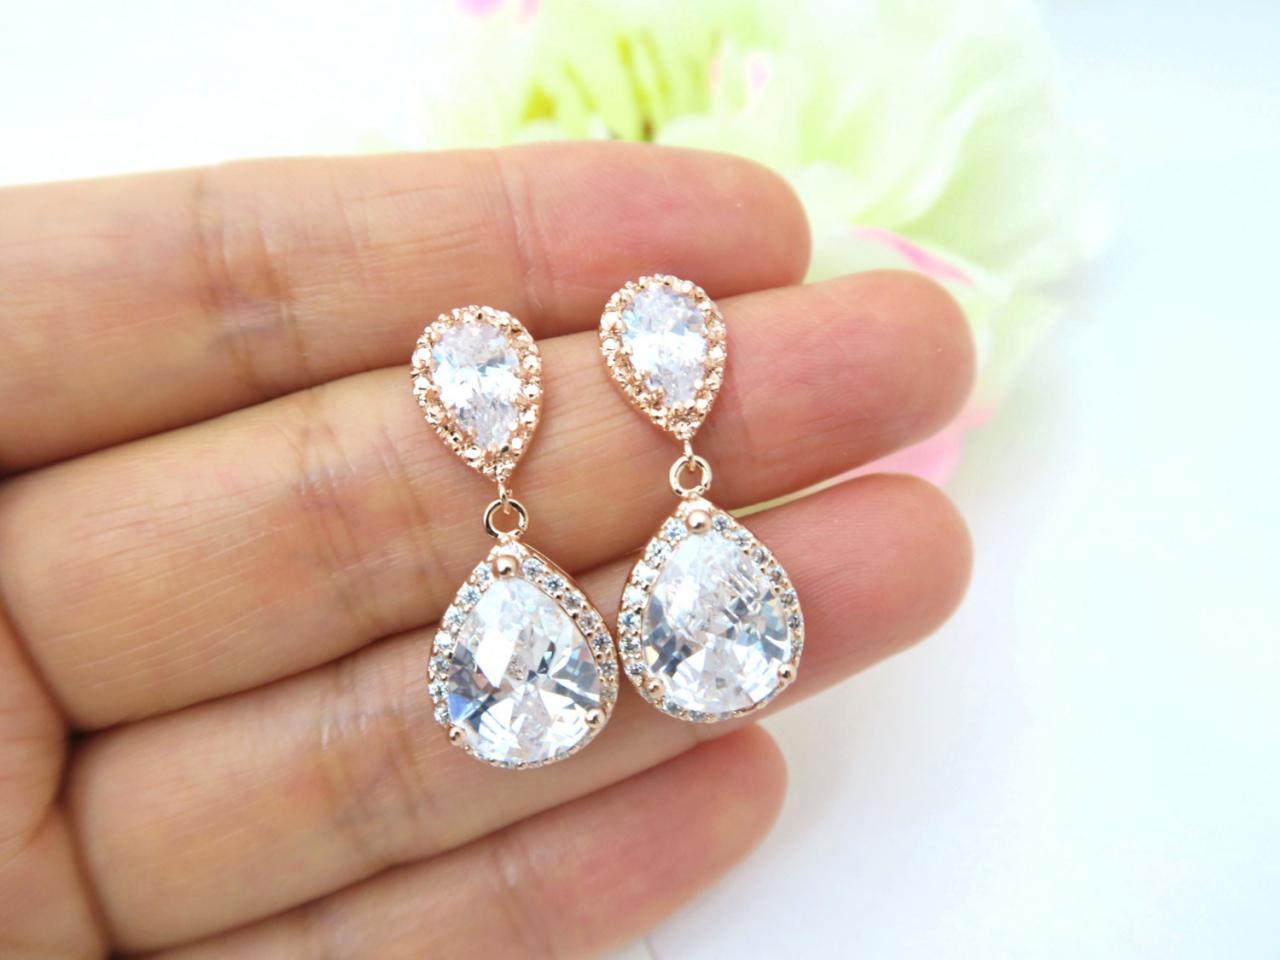 Rose Gold Earrings Large Lux Cubic Zirconia Earrings Teardrop Earrings Bridal Drop Earring Bridesmaid Gift Wedding Jewelry (e033)